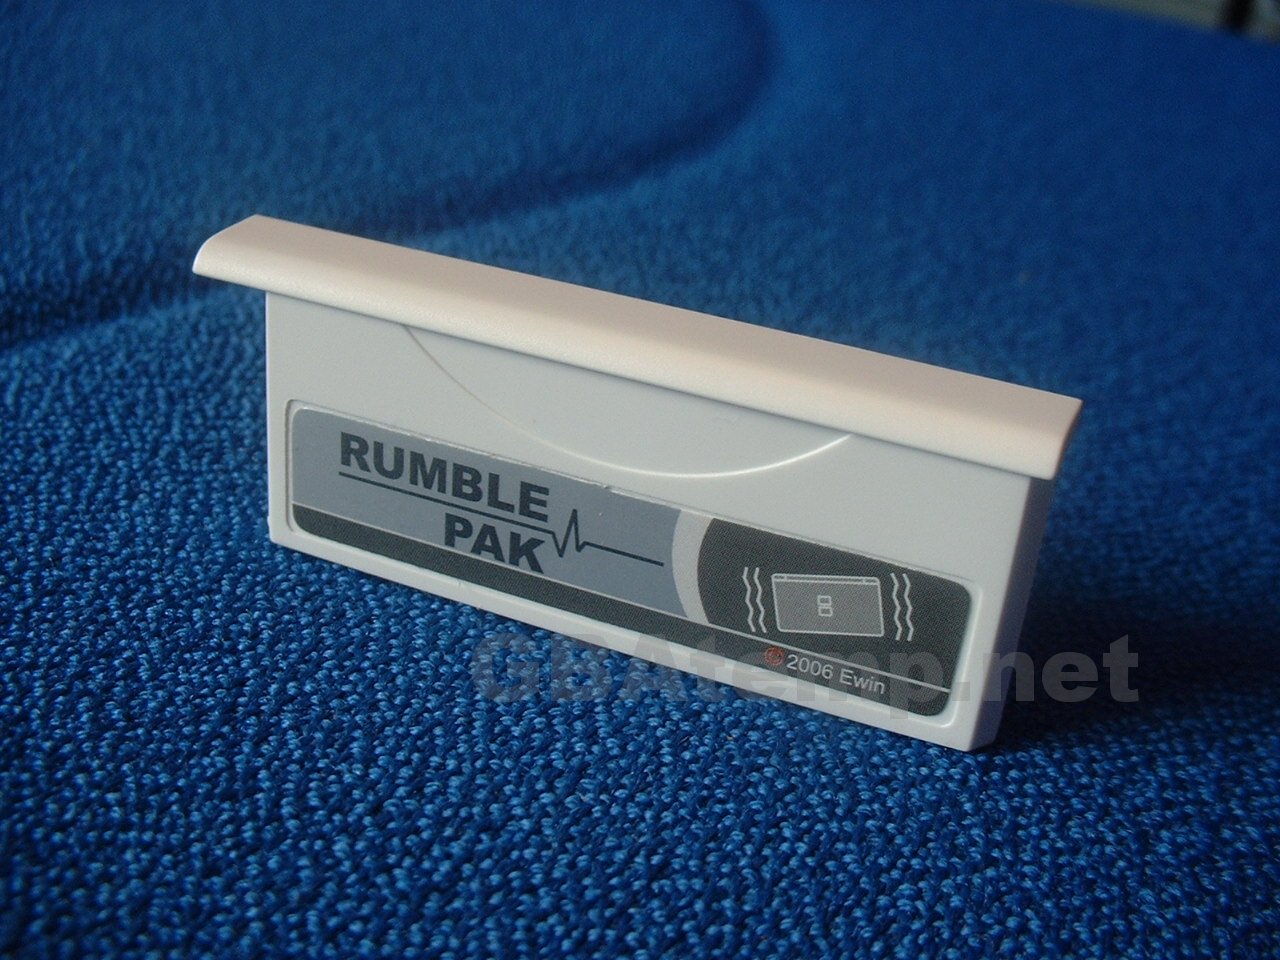 eWin Rumble Pak Review | GBAtemp.net - The Independent Video Game Community